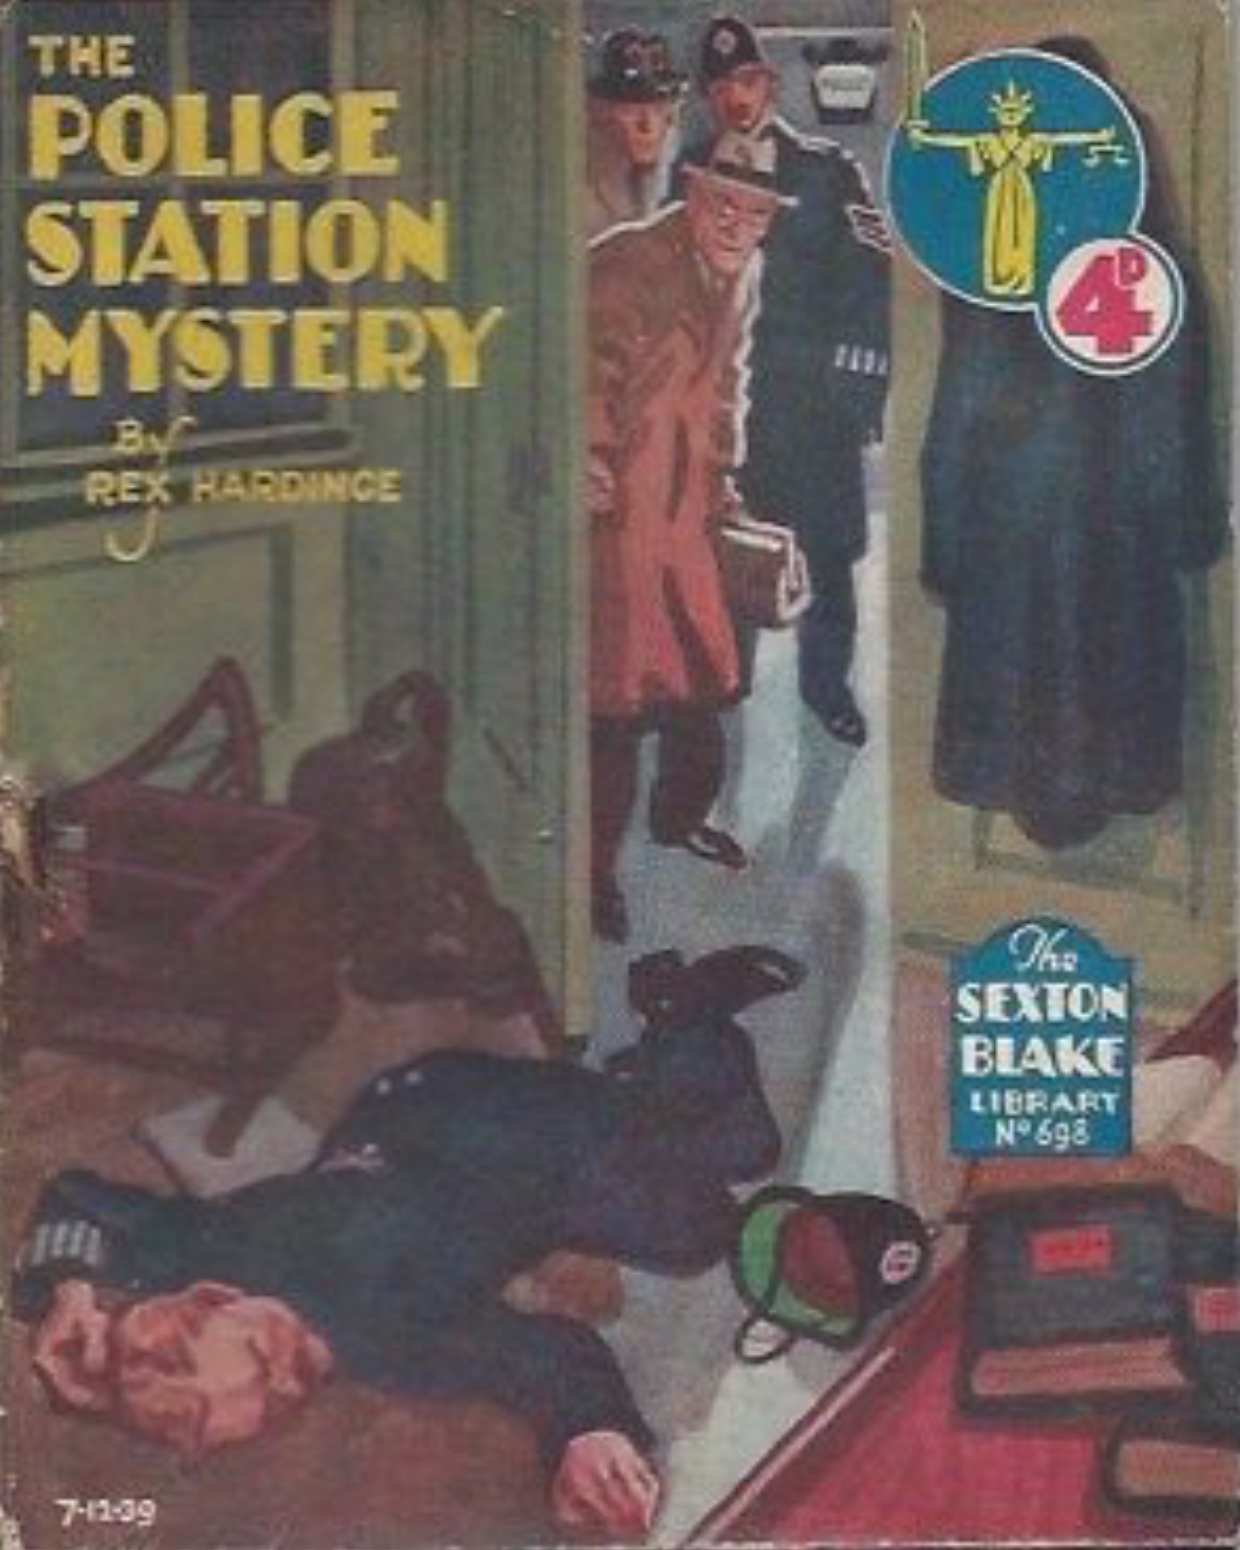 THE POLICE STATION MYSTERY